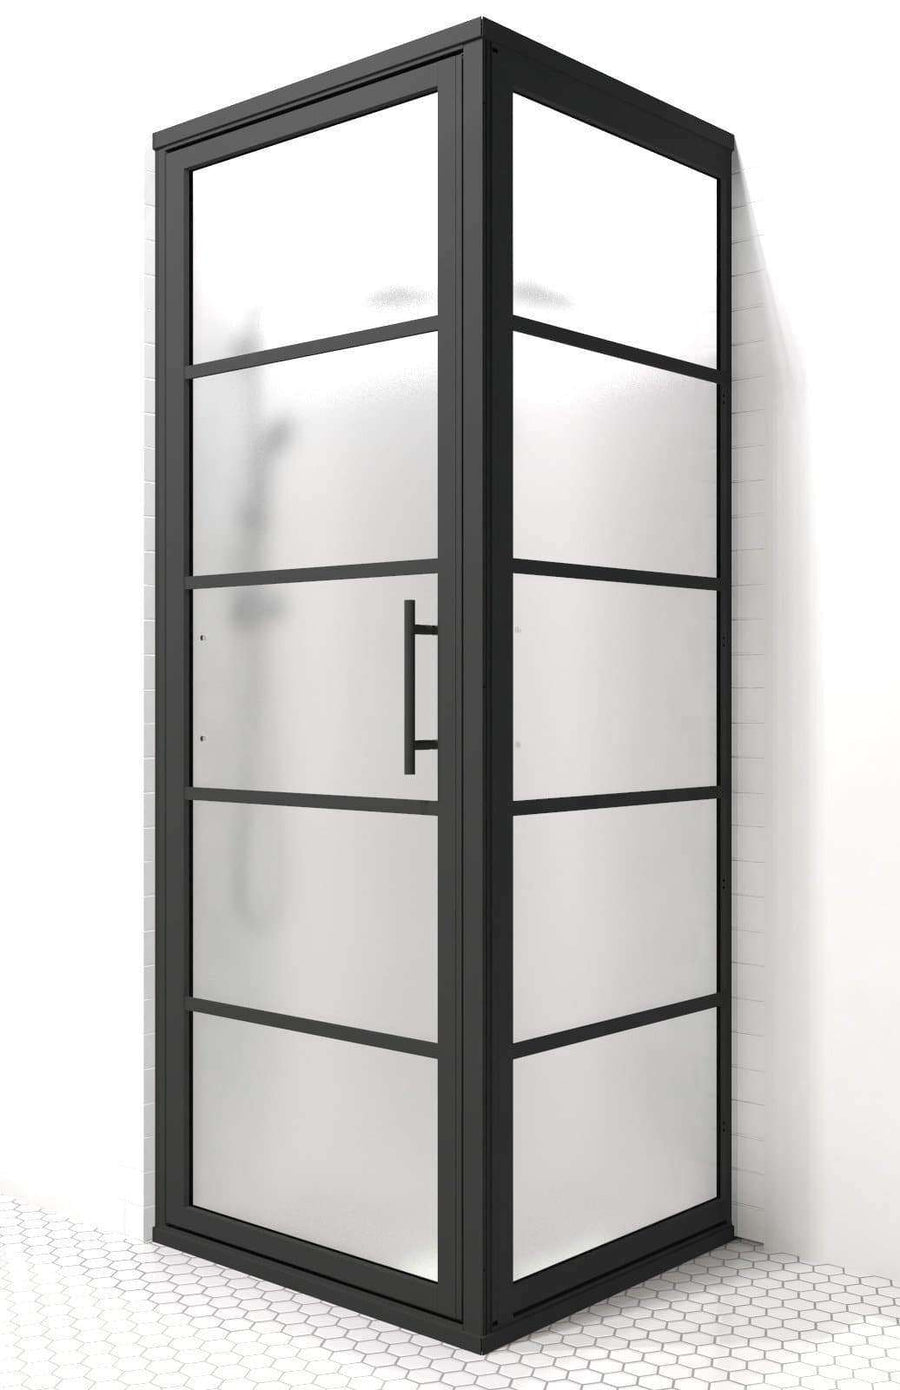 Industrial Black Framed Shower Doors - Gridscape GS2 with SatinDeco Frosted Glass by Coastal Shower Doors